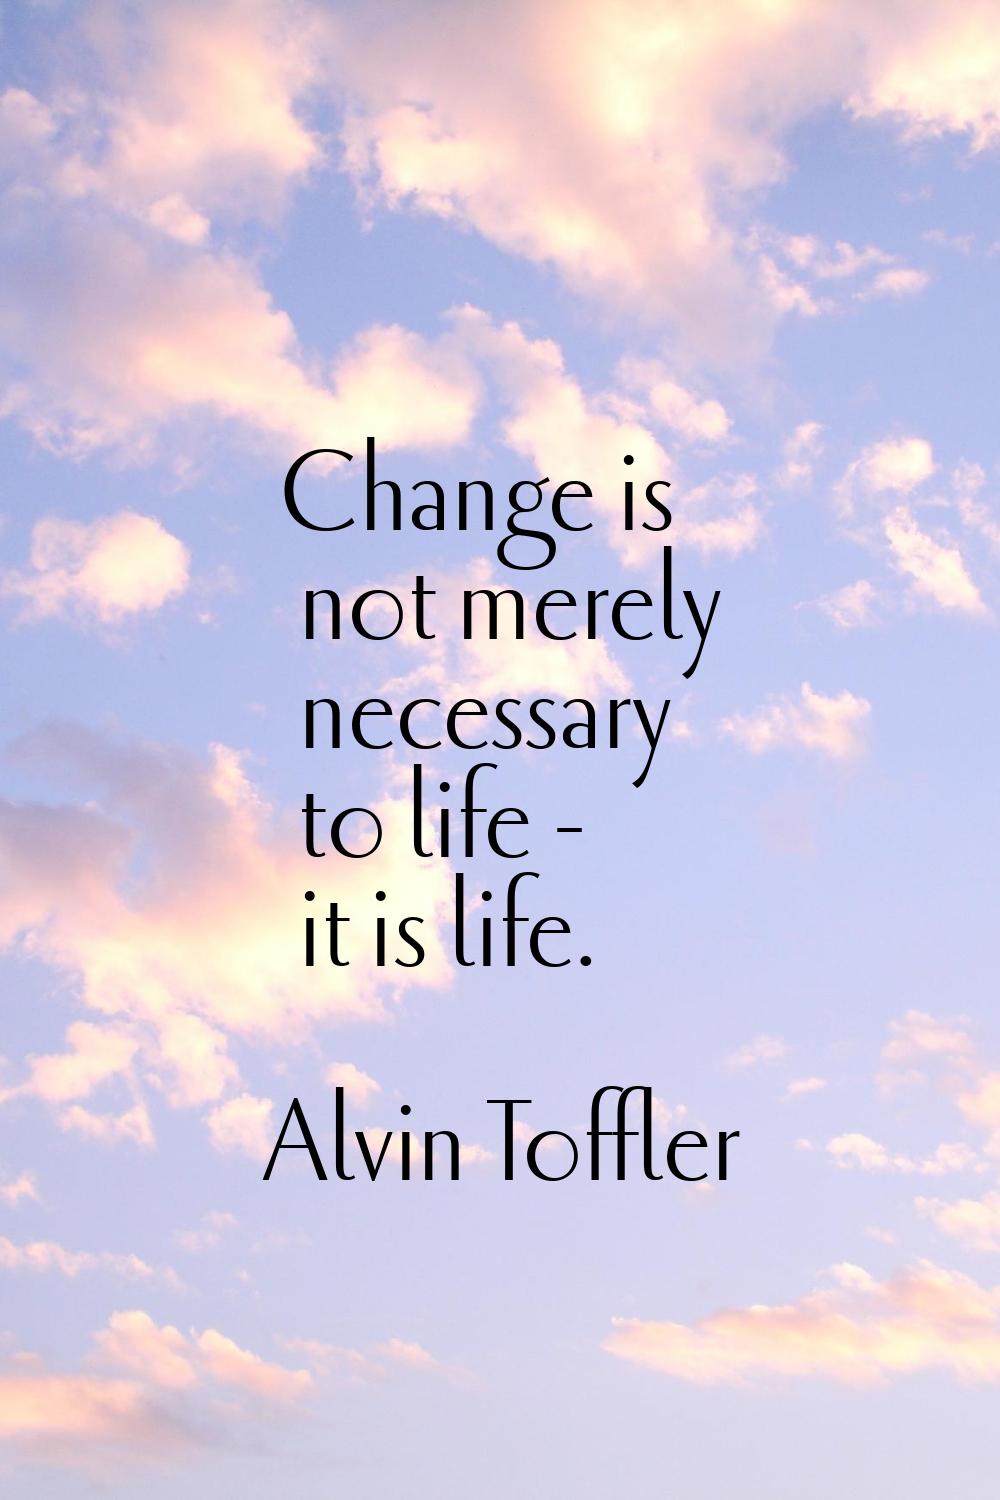 Change is not merely necessary to life - it is life.